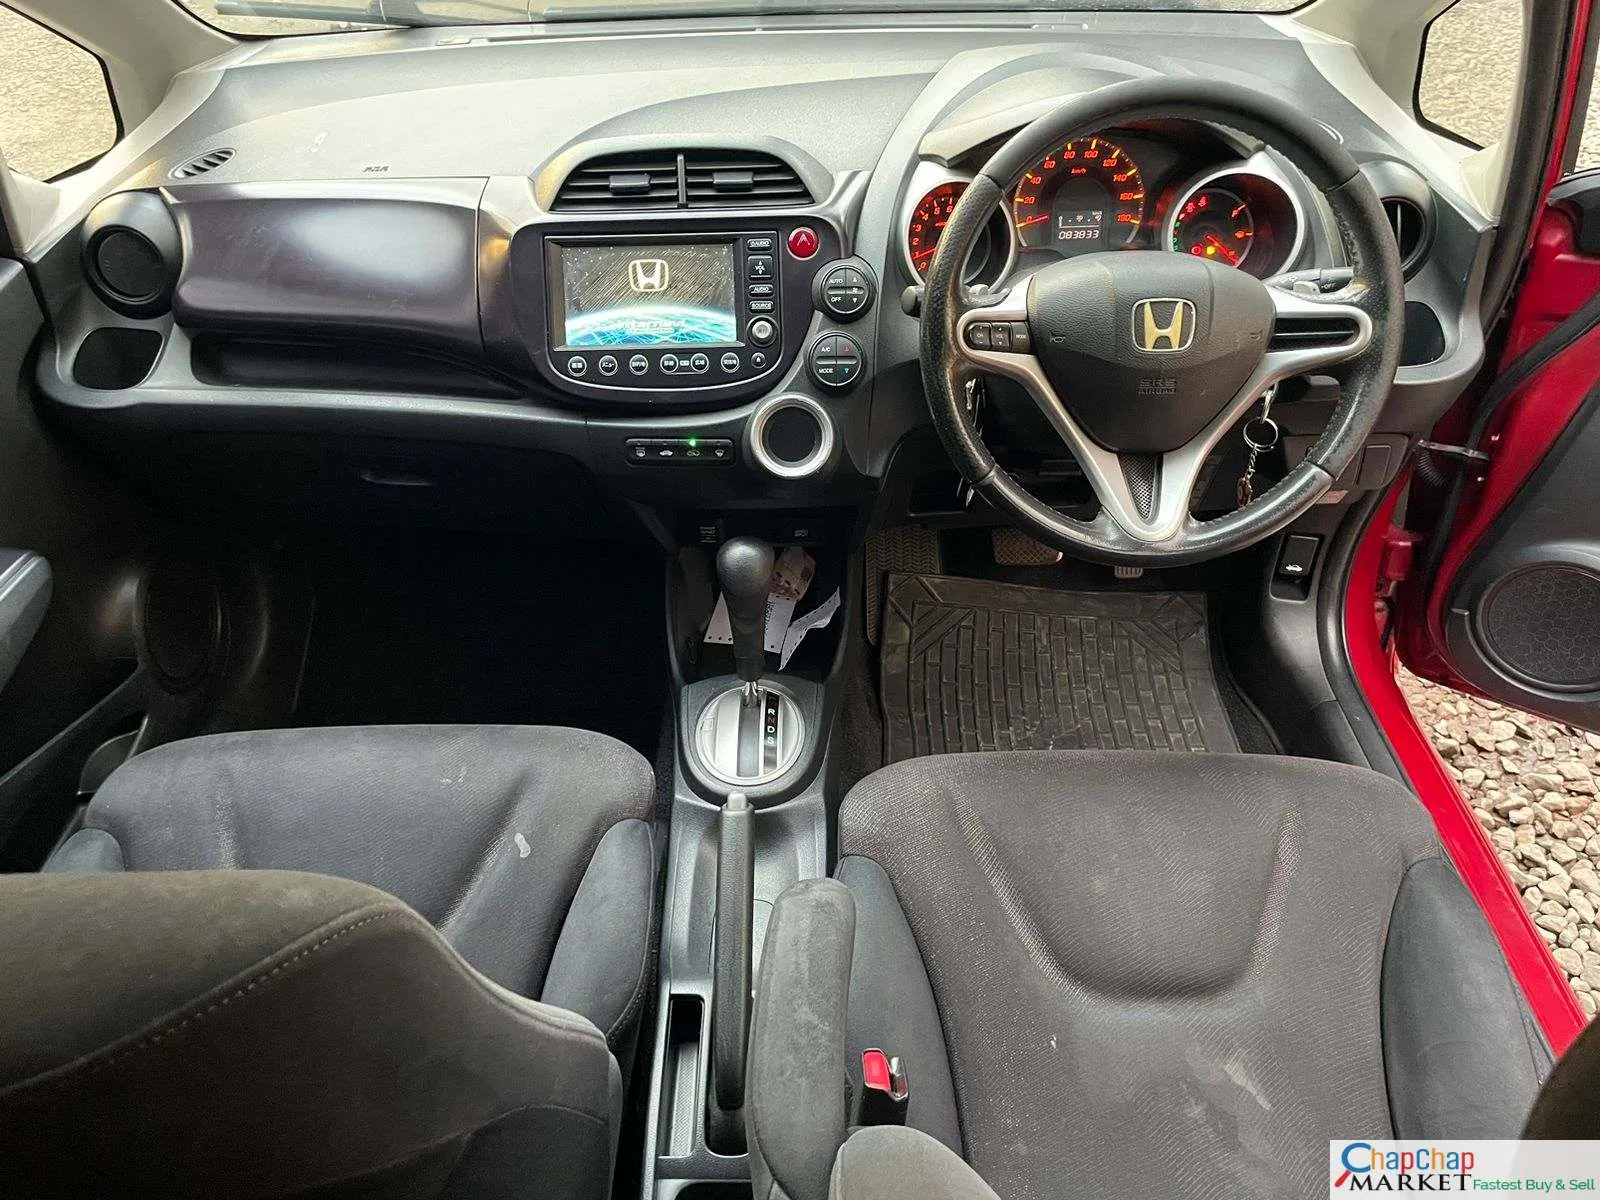 Honda fit RS 🔥 QUICK SALE You Pay 30% Deposit Trade in OK EXCLUSIVE